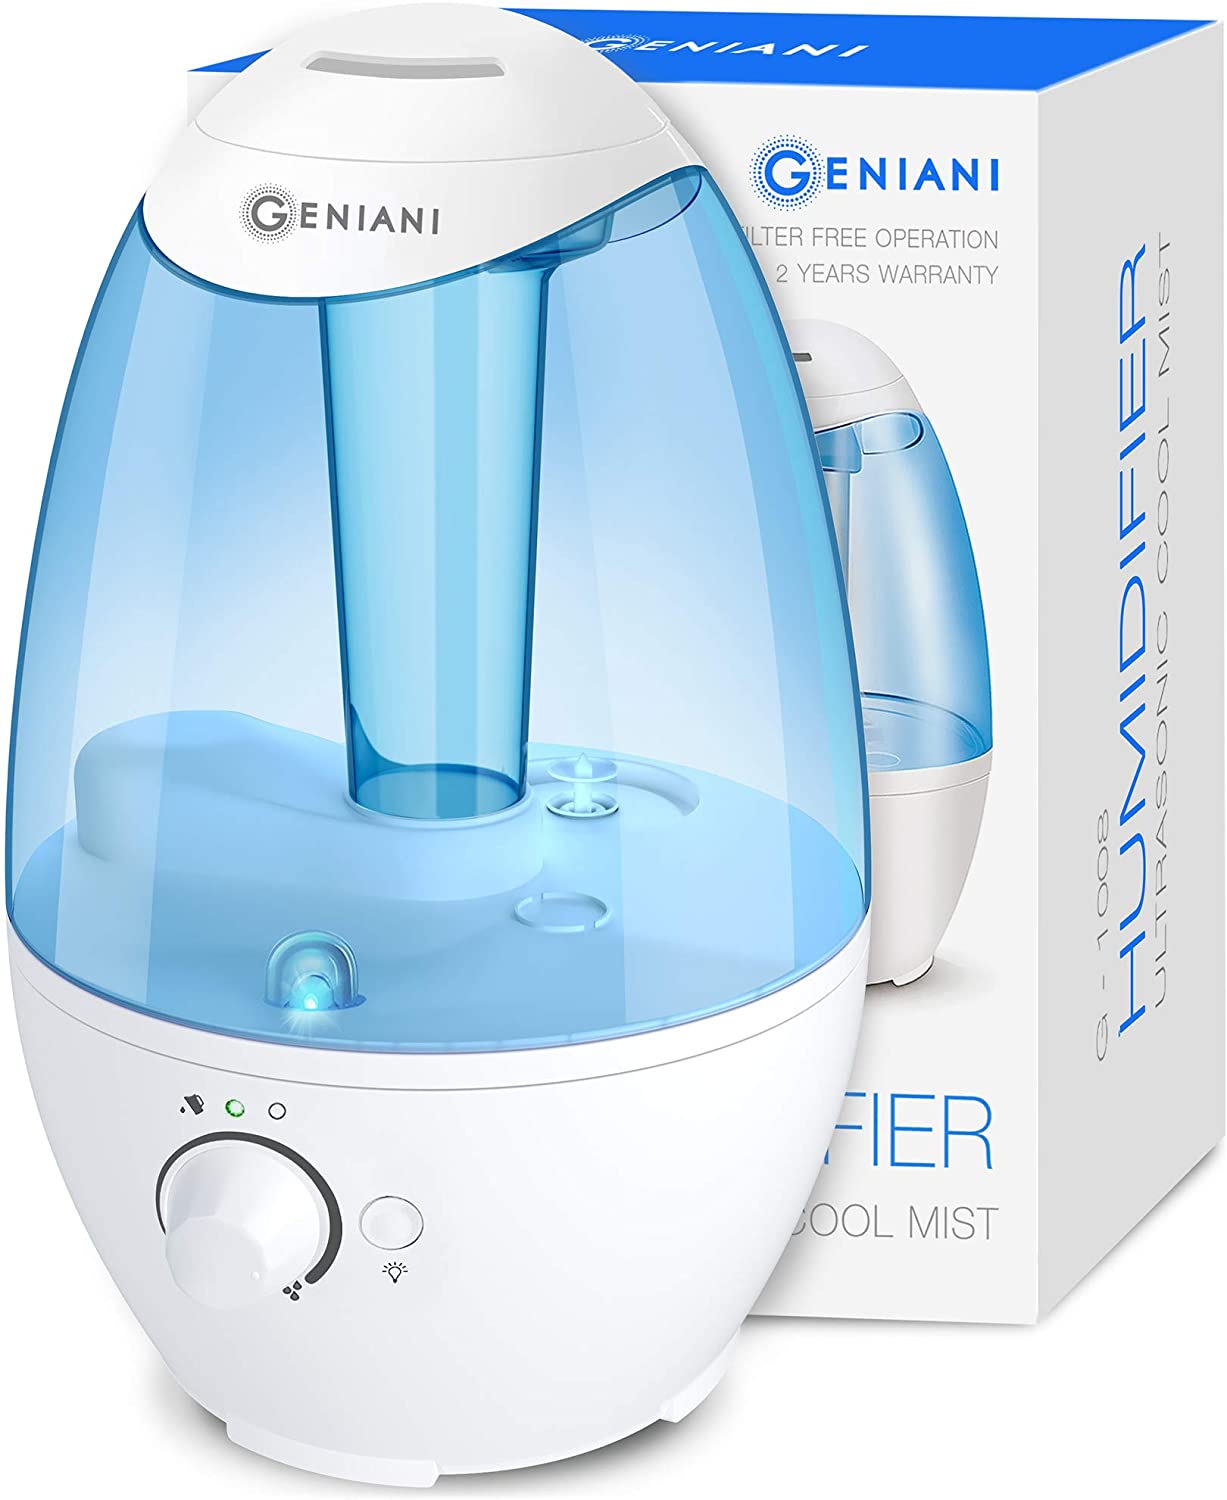 8 Best Humidifier for Asthma 2020 â Top Picks and Reviews